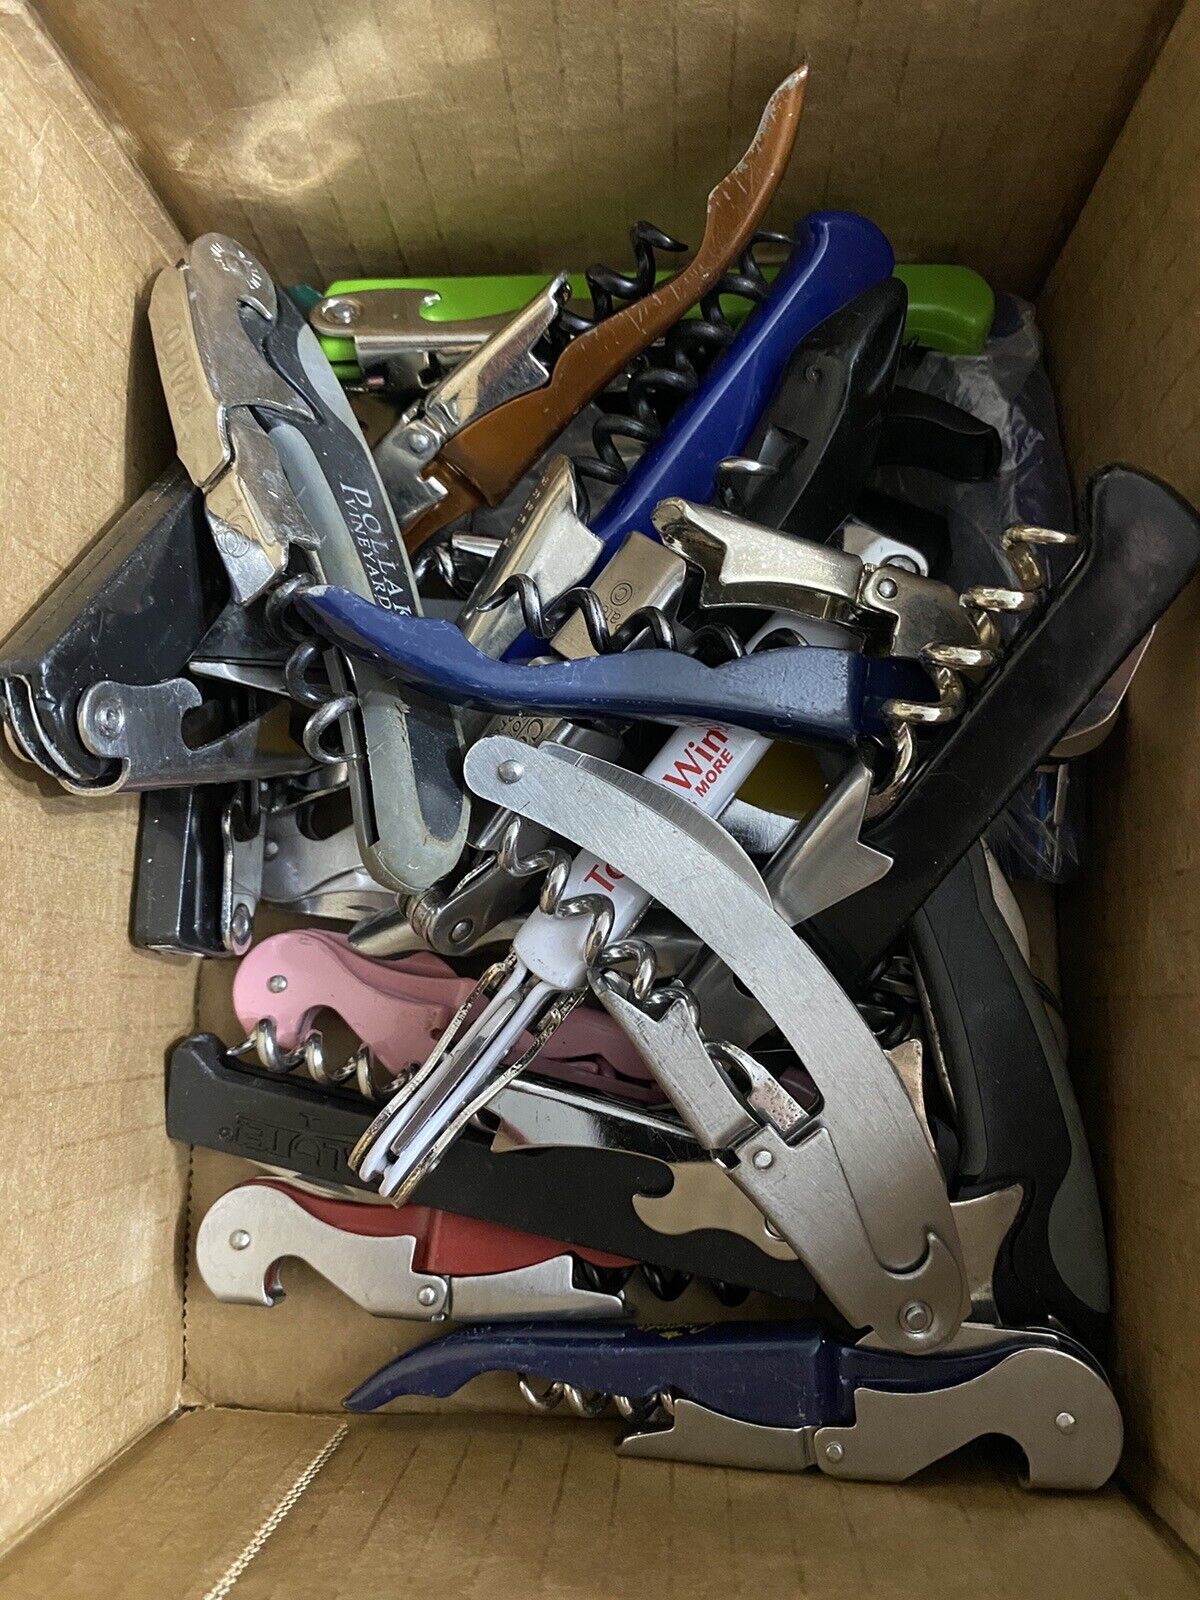 Lot of 50 CORKSCREW, Stainless, Waiter's Friend Openers they are mixed, USED